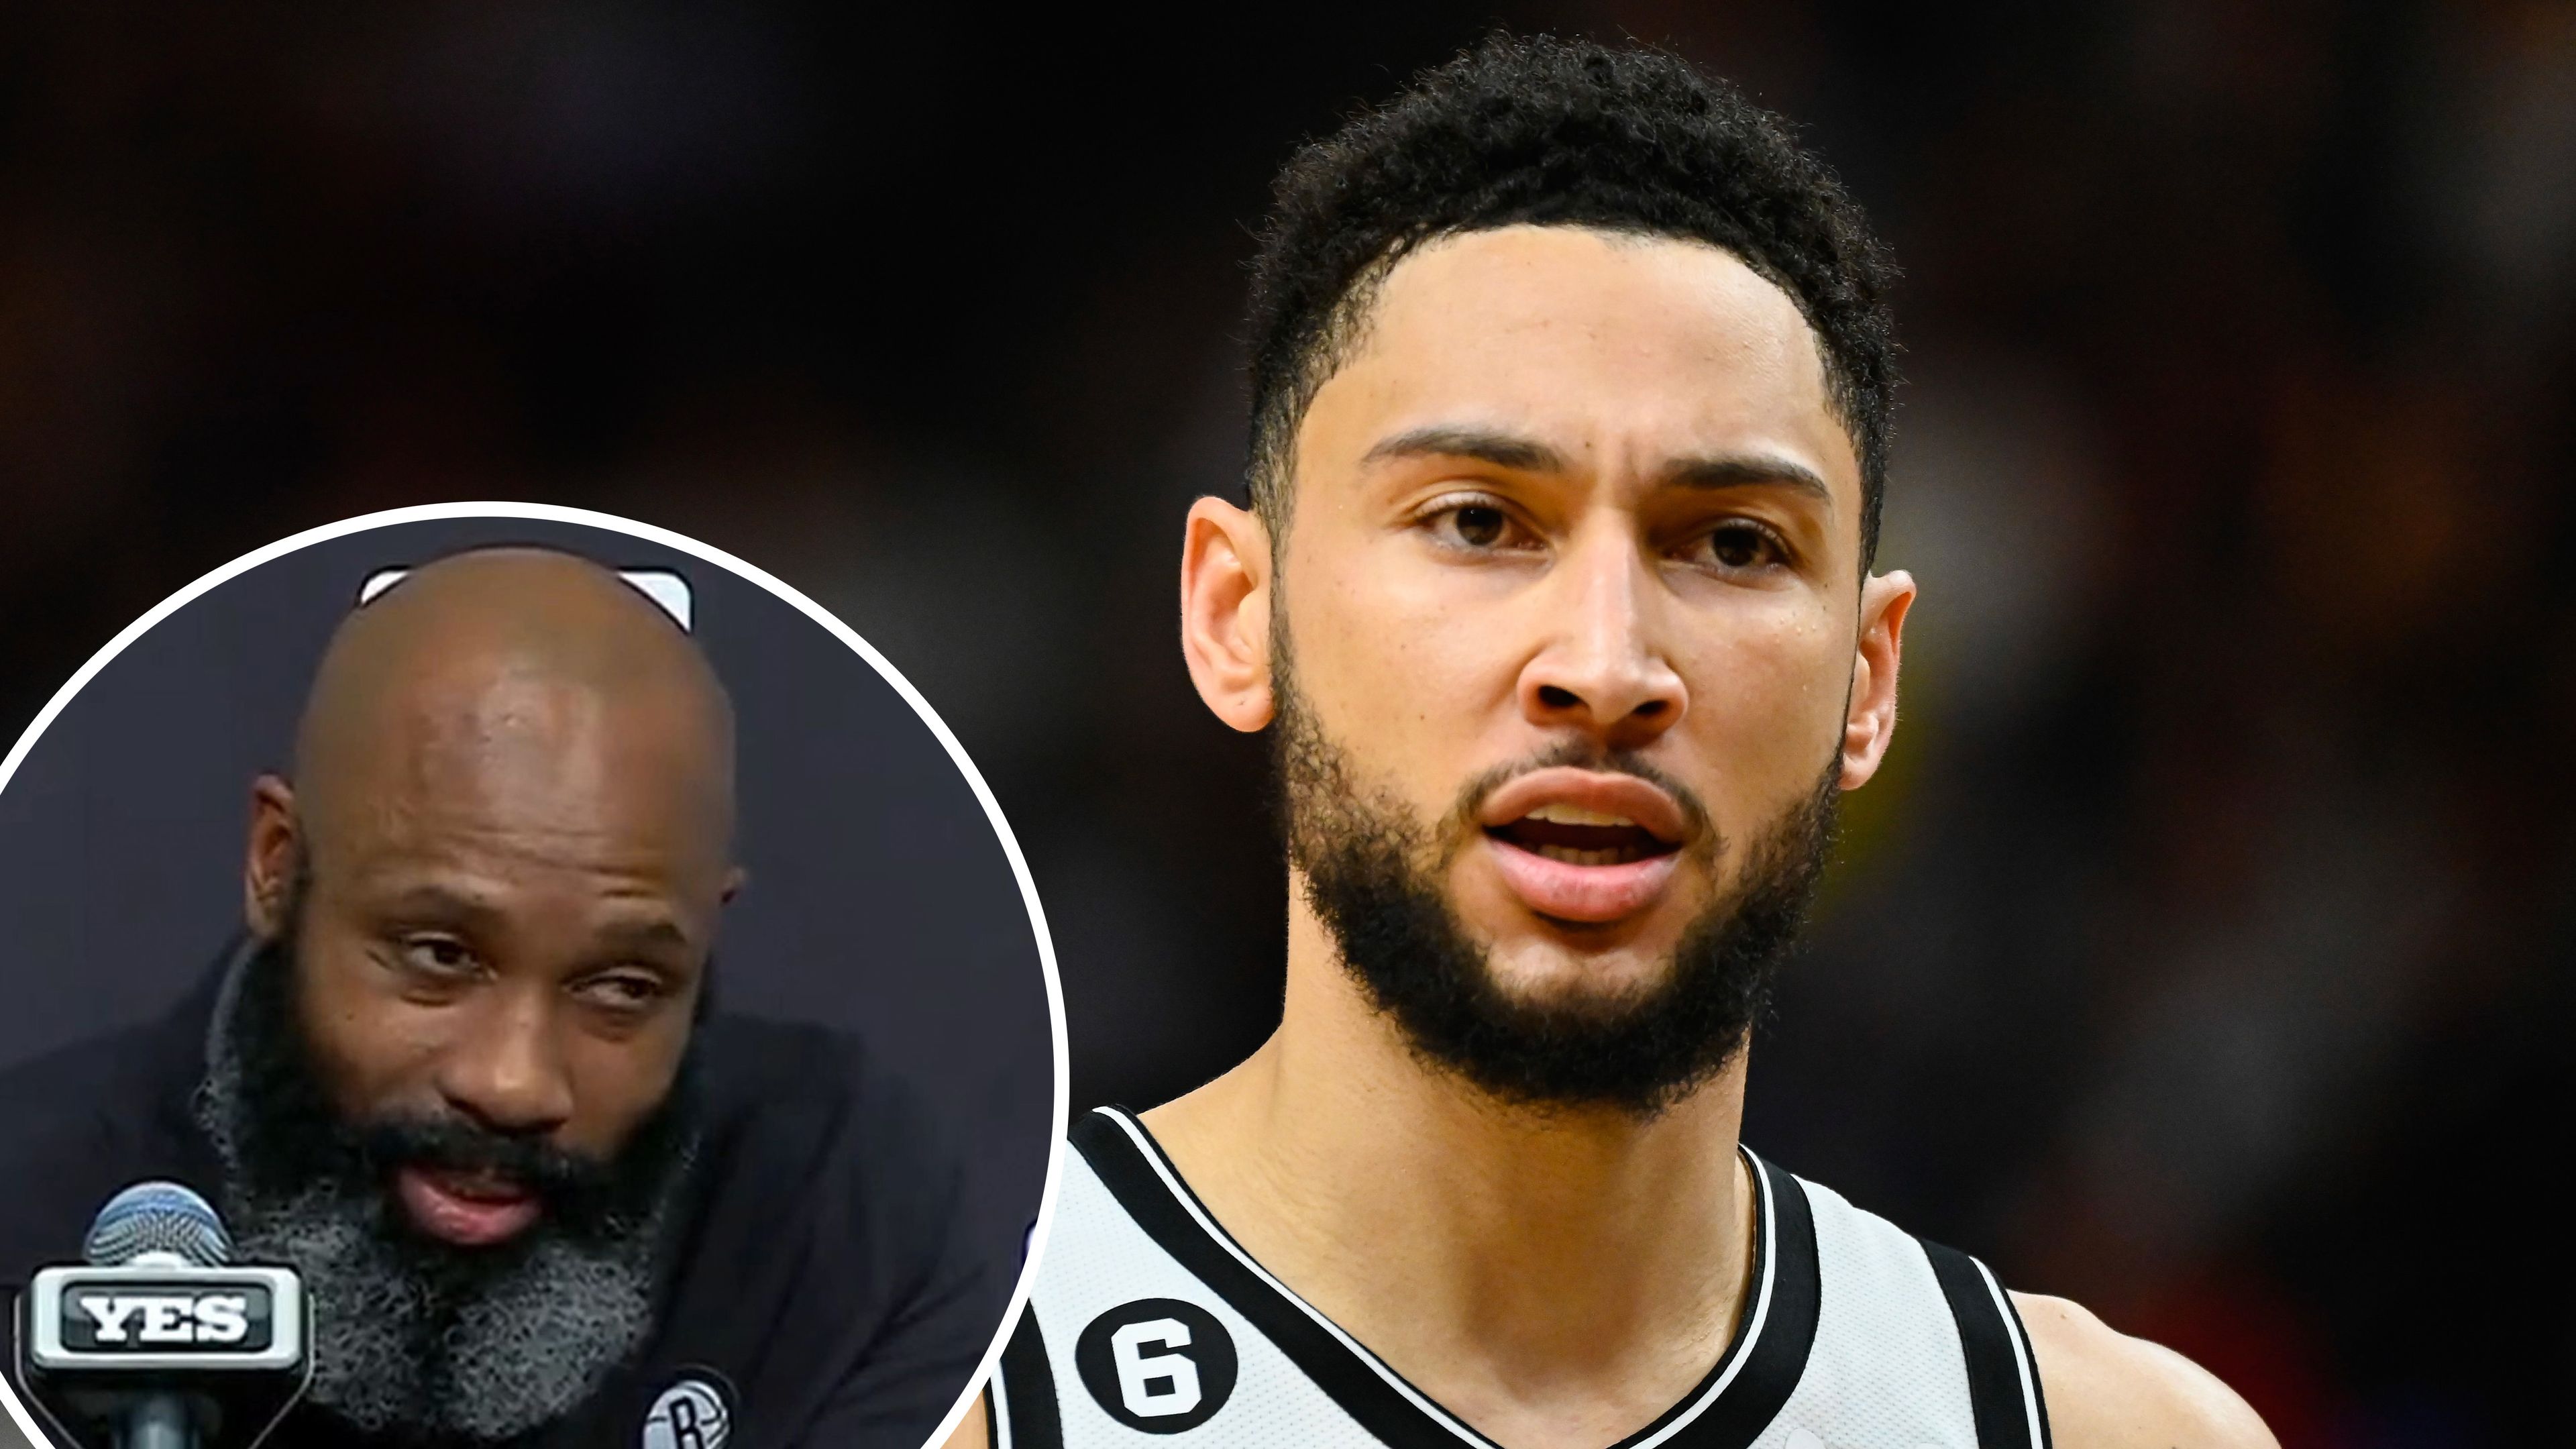 Brooklyn Nets coach Jacque Vaughn's stinging words over Ben Simmons' withdrawal